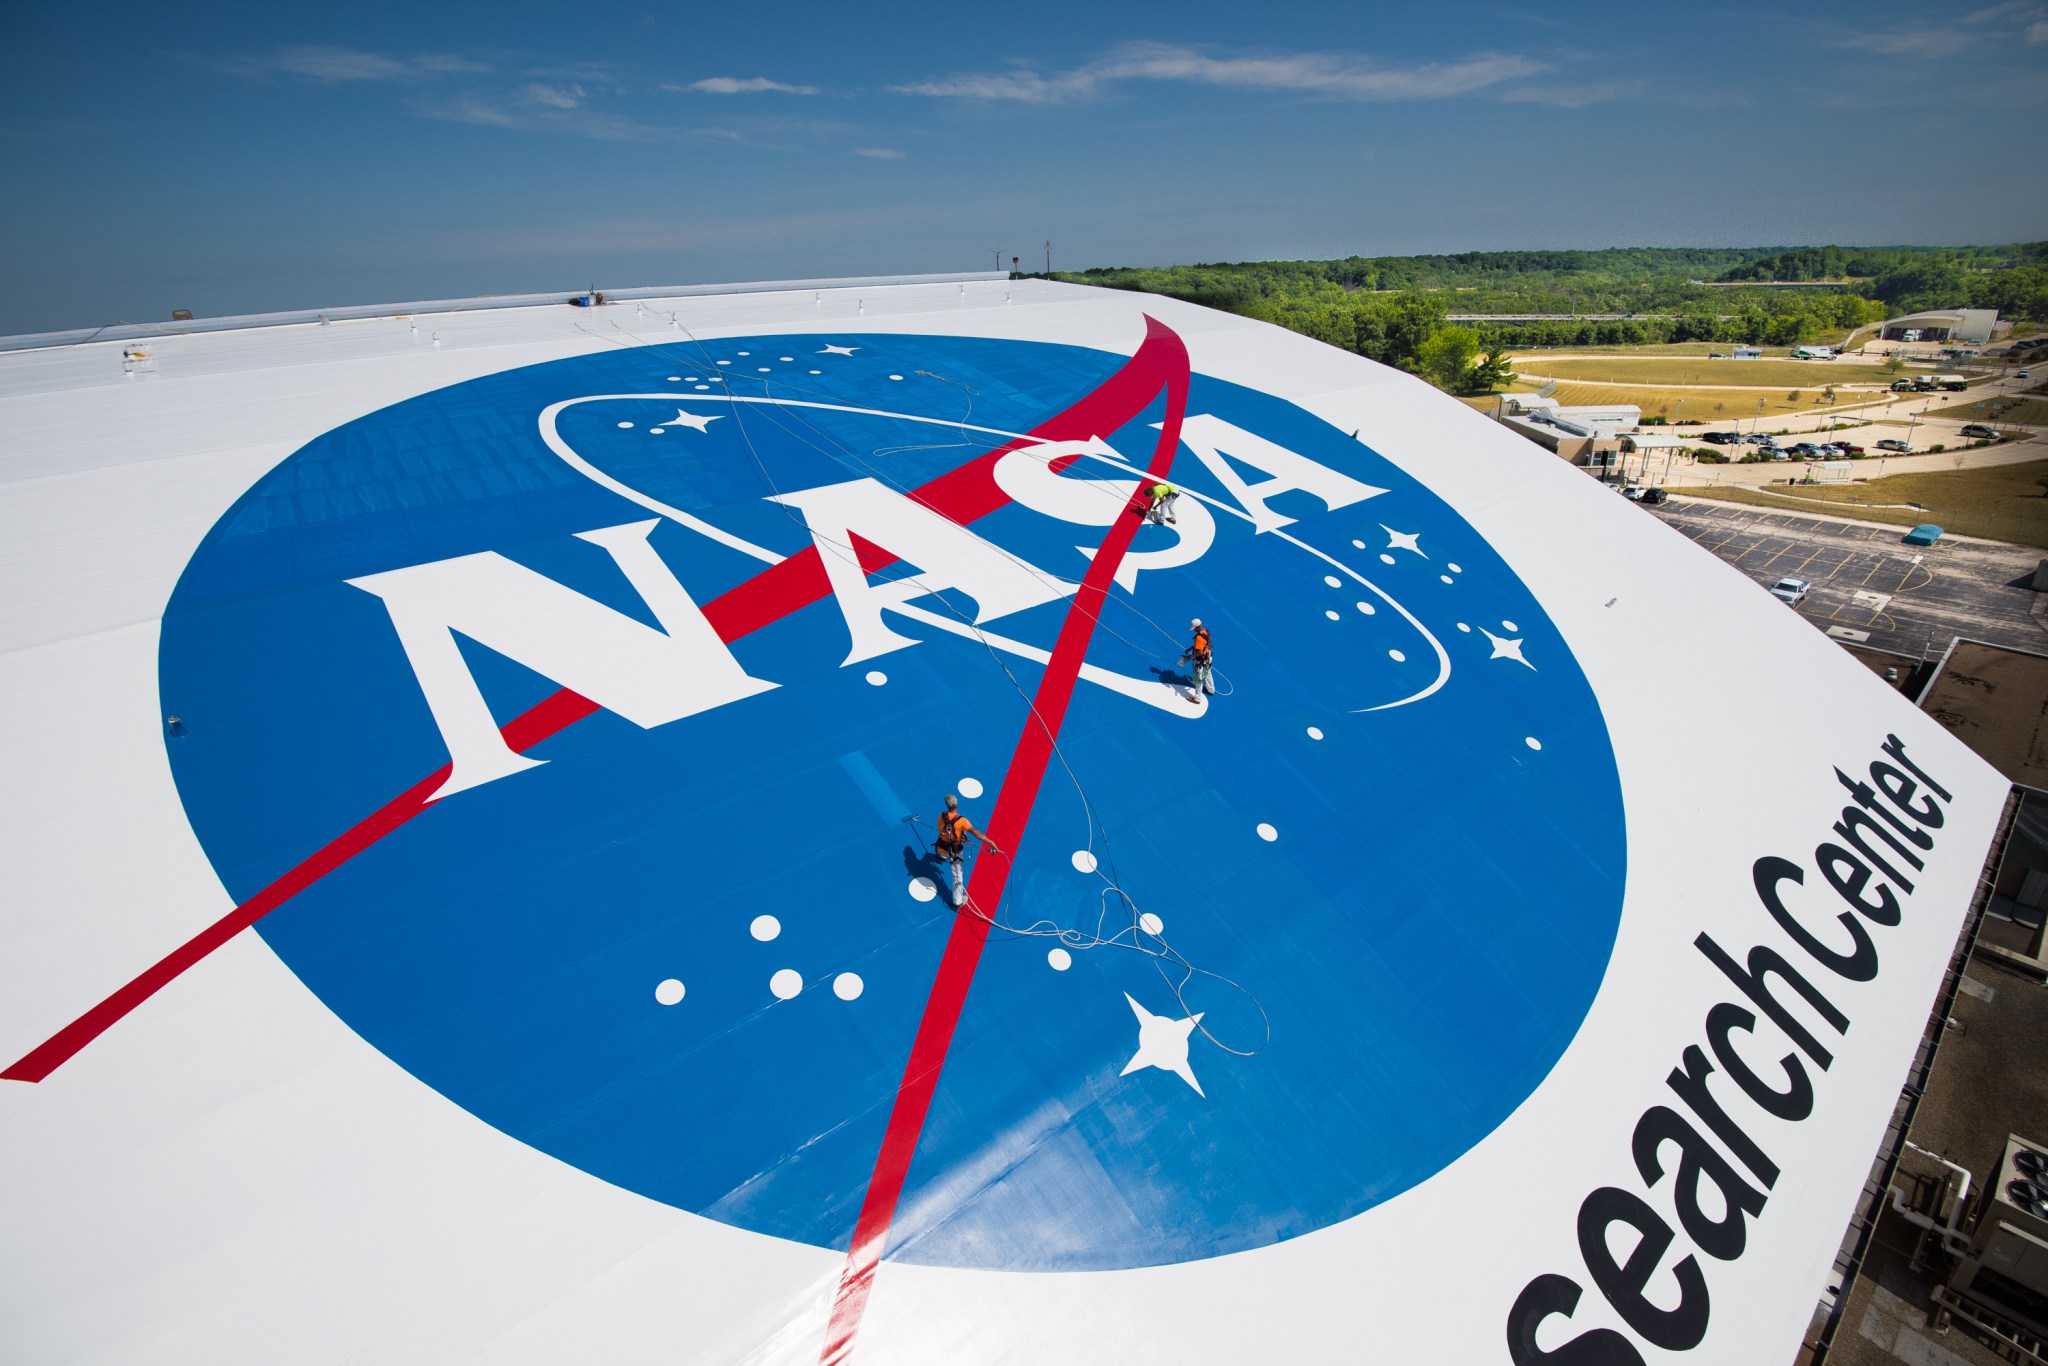 A black-and-white photo of a crane lifting a large sign with the NASA “meatball” insignia onto the outside of a hangar building.